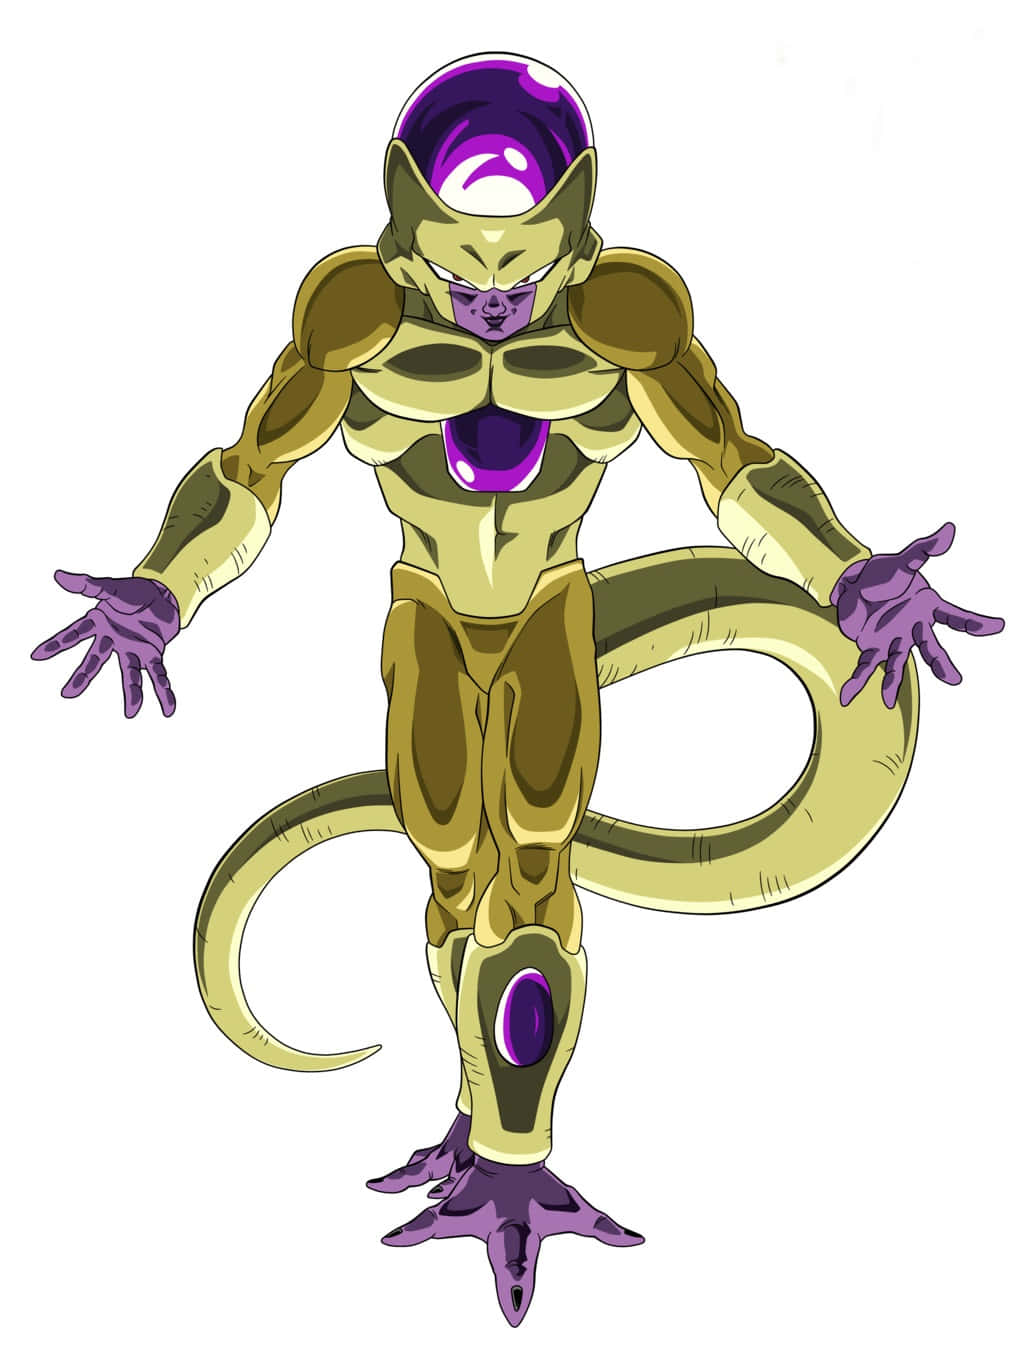 Majestic Golden Frieza from the Dragon Ball Z series Wallpaper